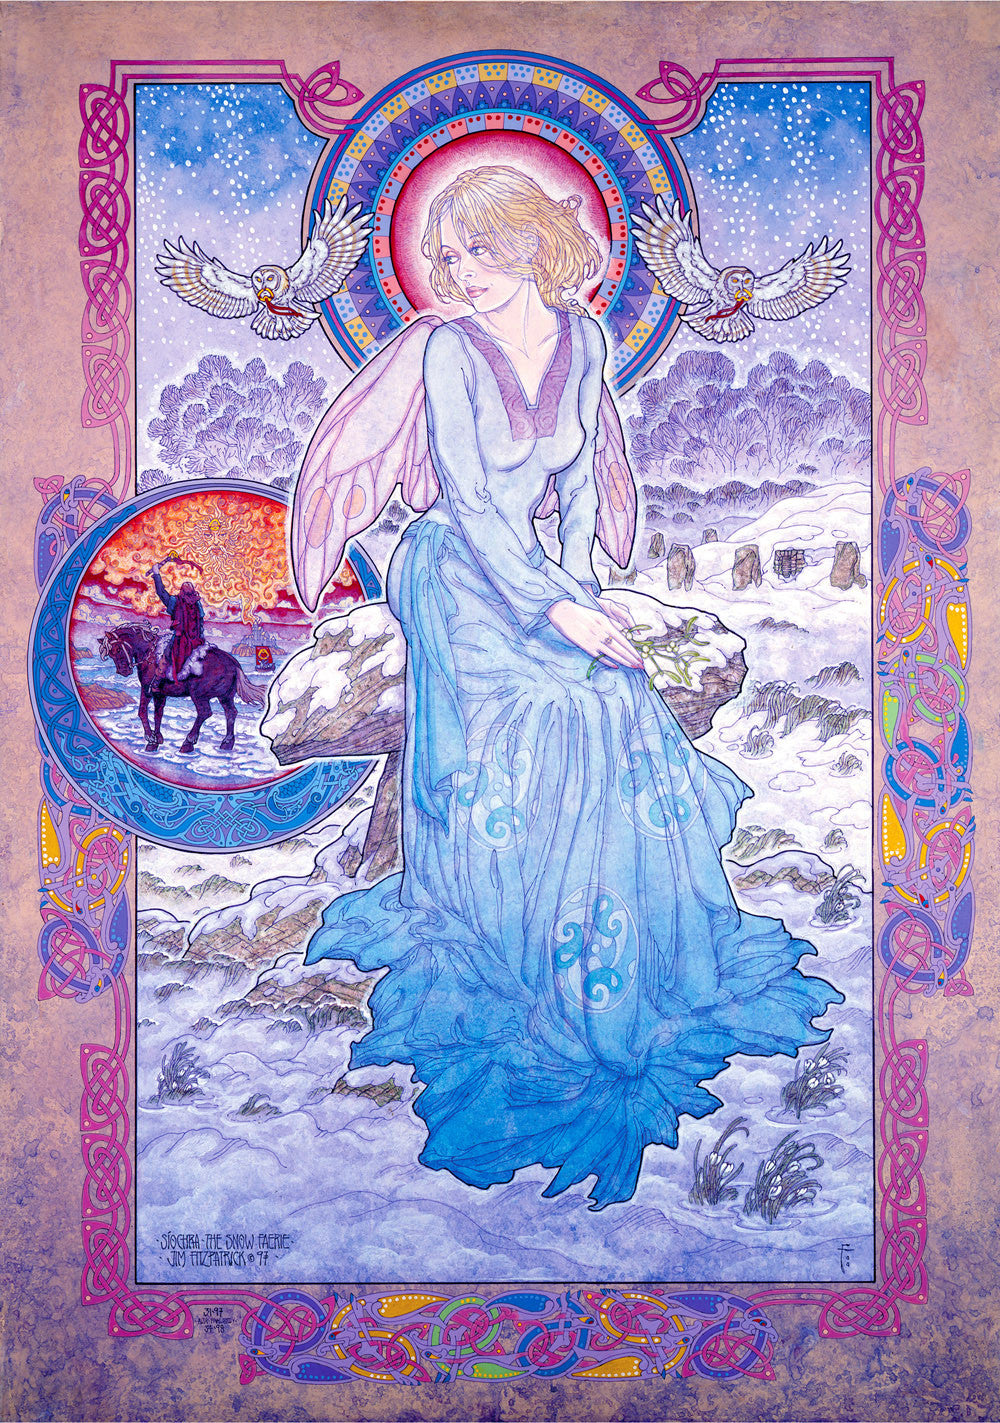 Siochra The Snow Faerie by Jim FitzPatrick - Green Gallery